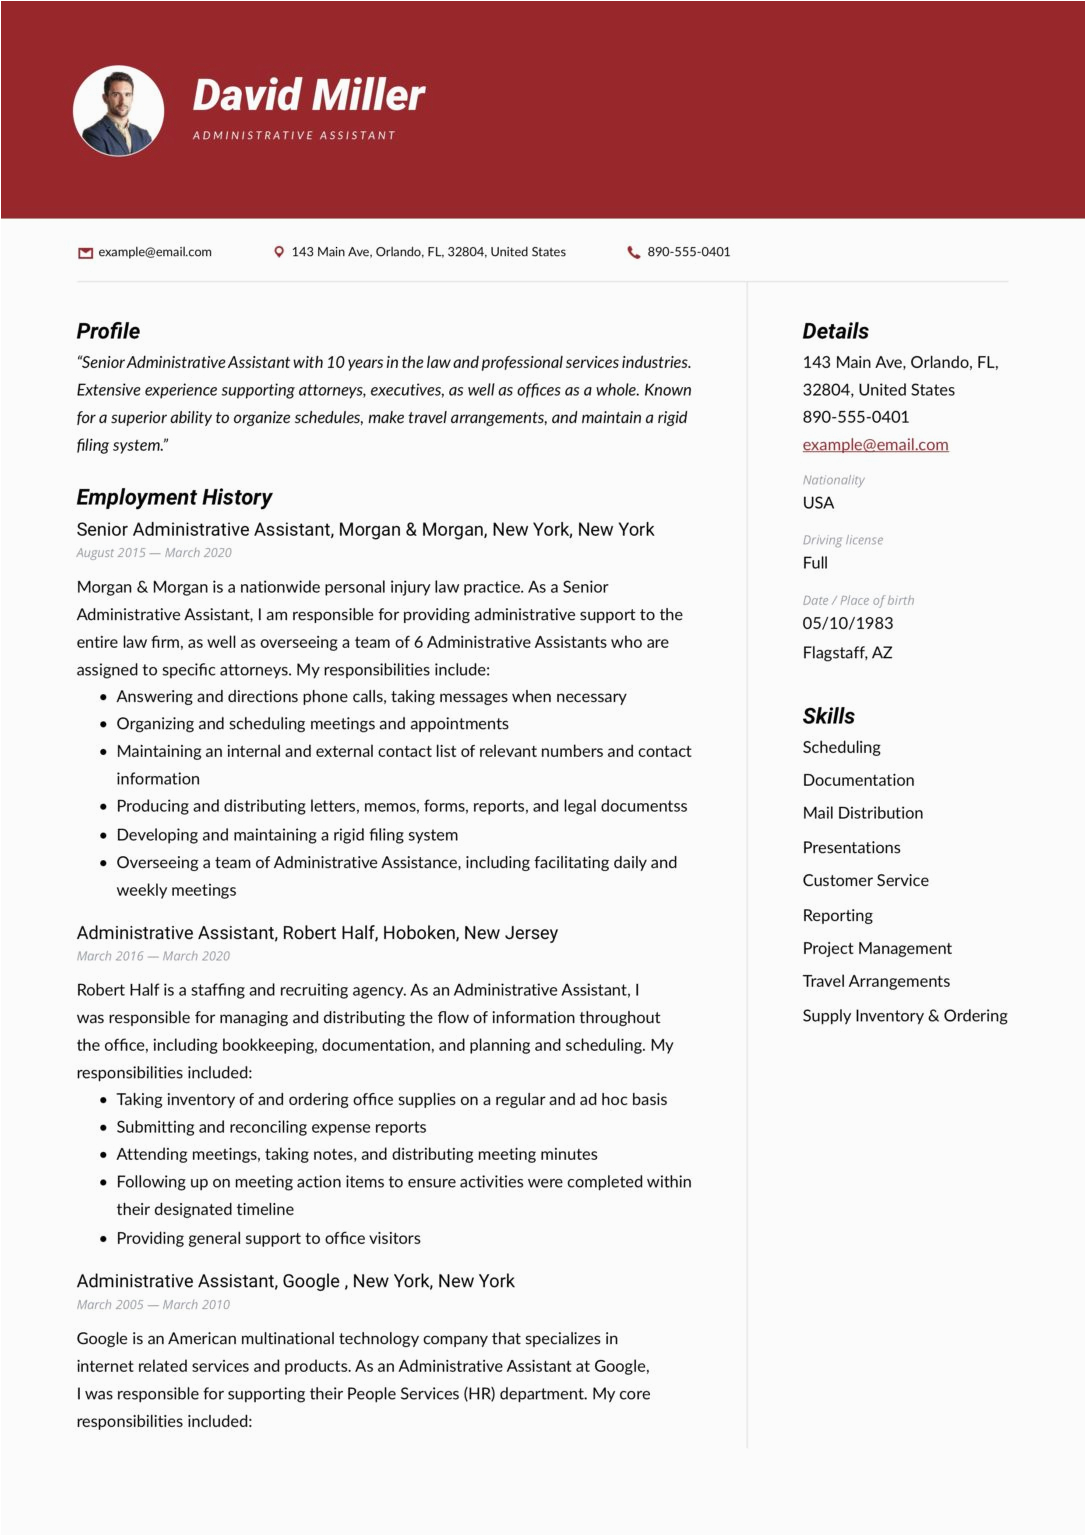 Sample Resume Of Administrative assistant Creator 19 Free Administrative assistant Resumes & Writing Guide